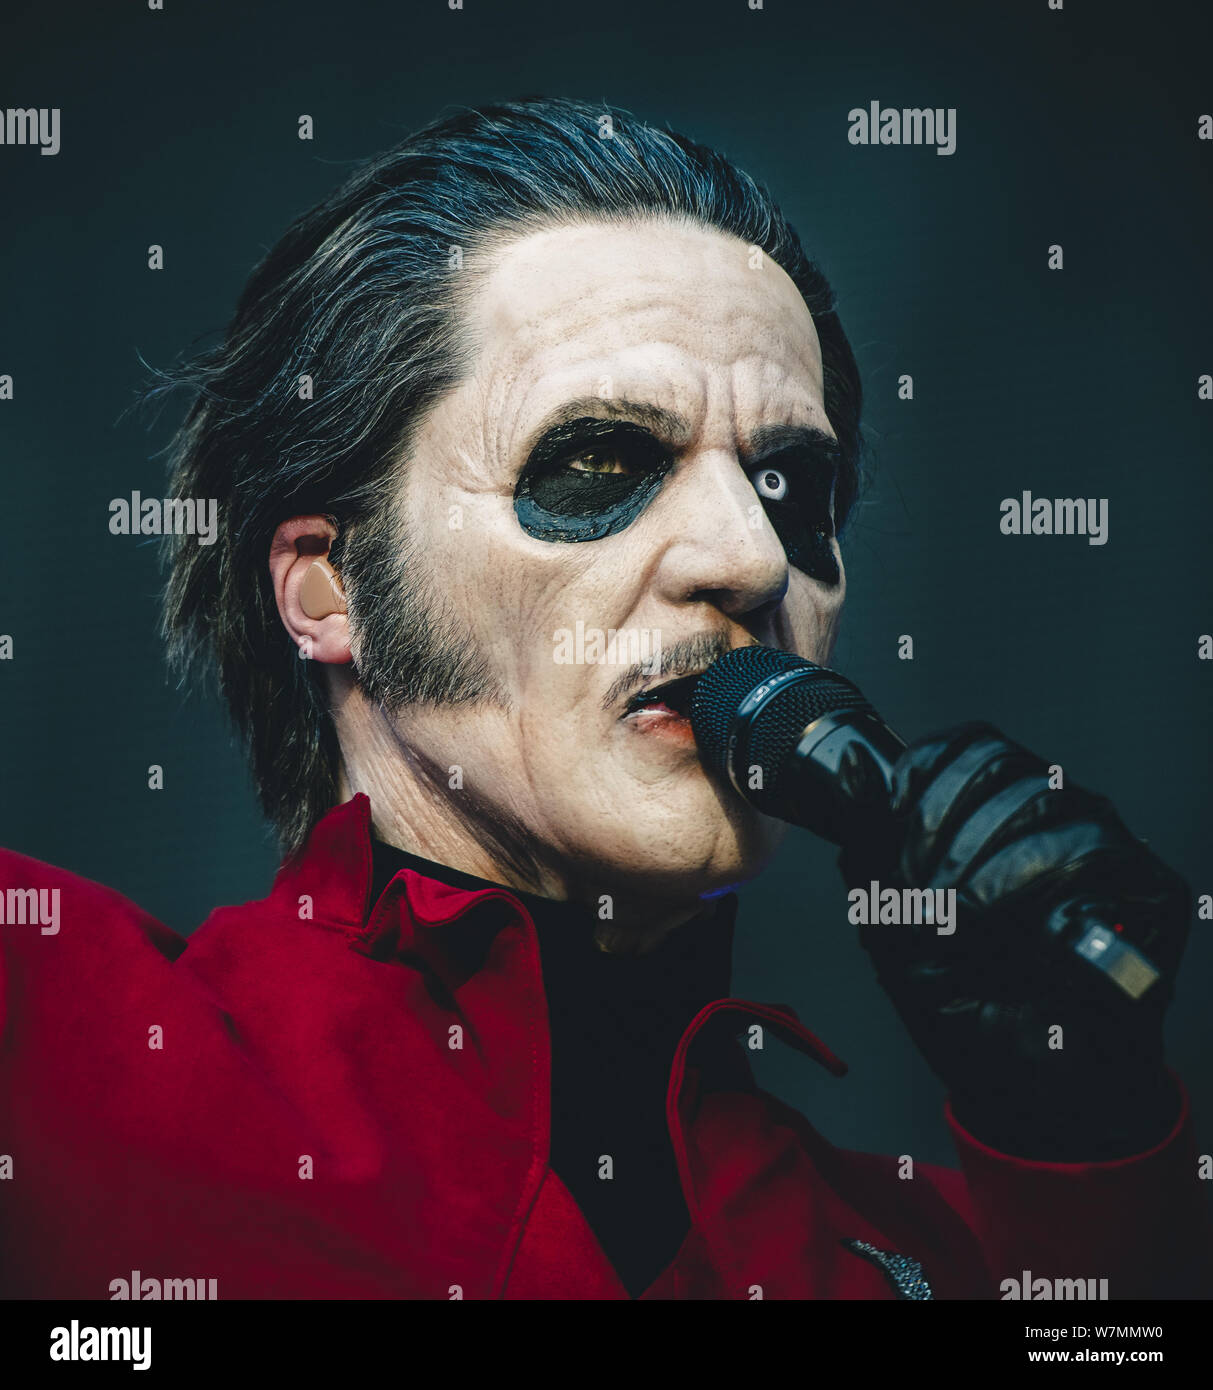 Tobias Forge reveals surprise influence of Eurovision on metal band Ghost